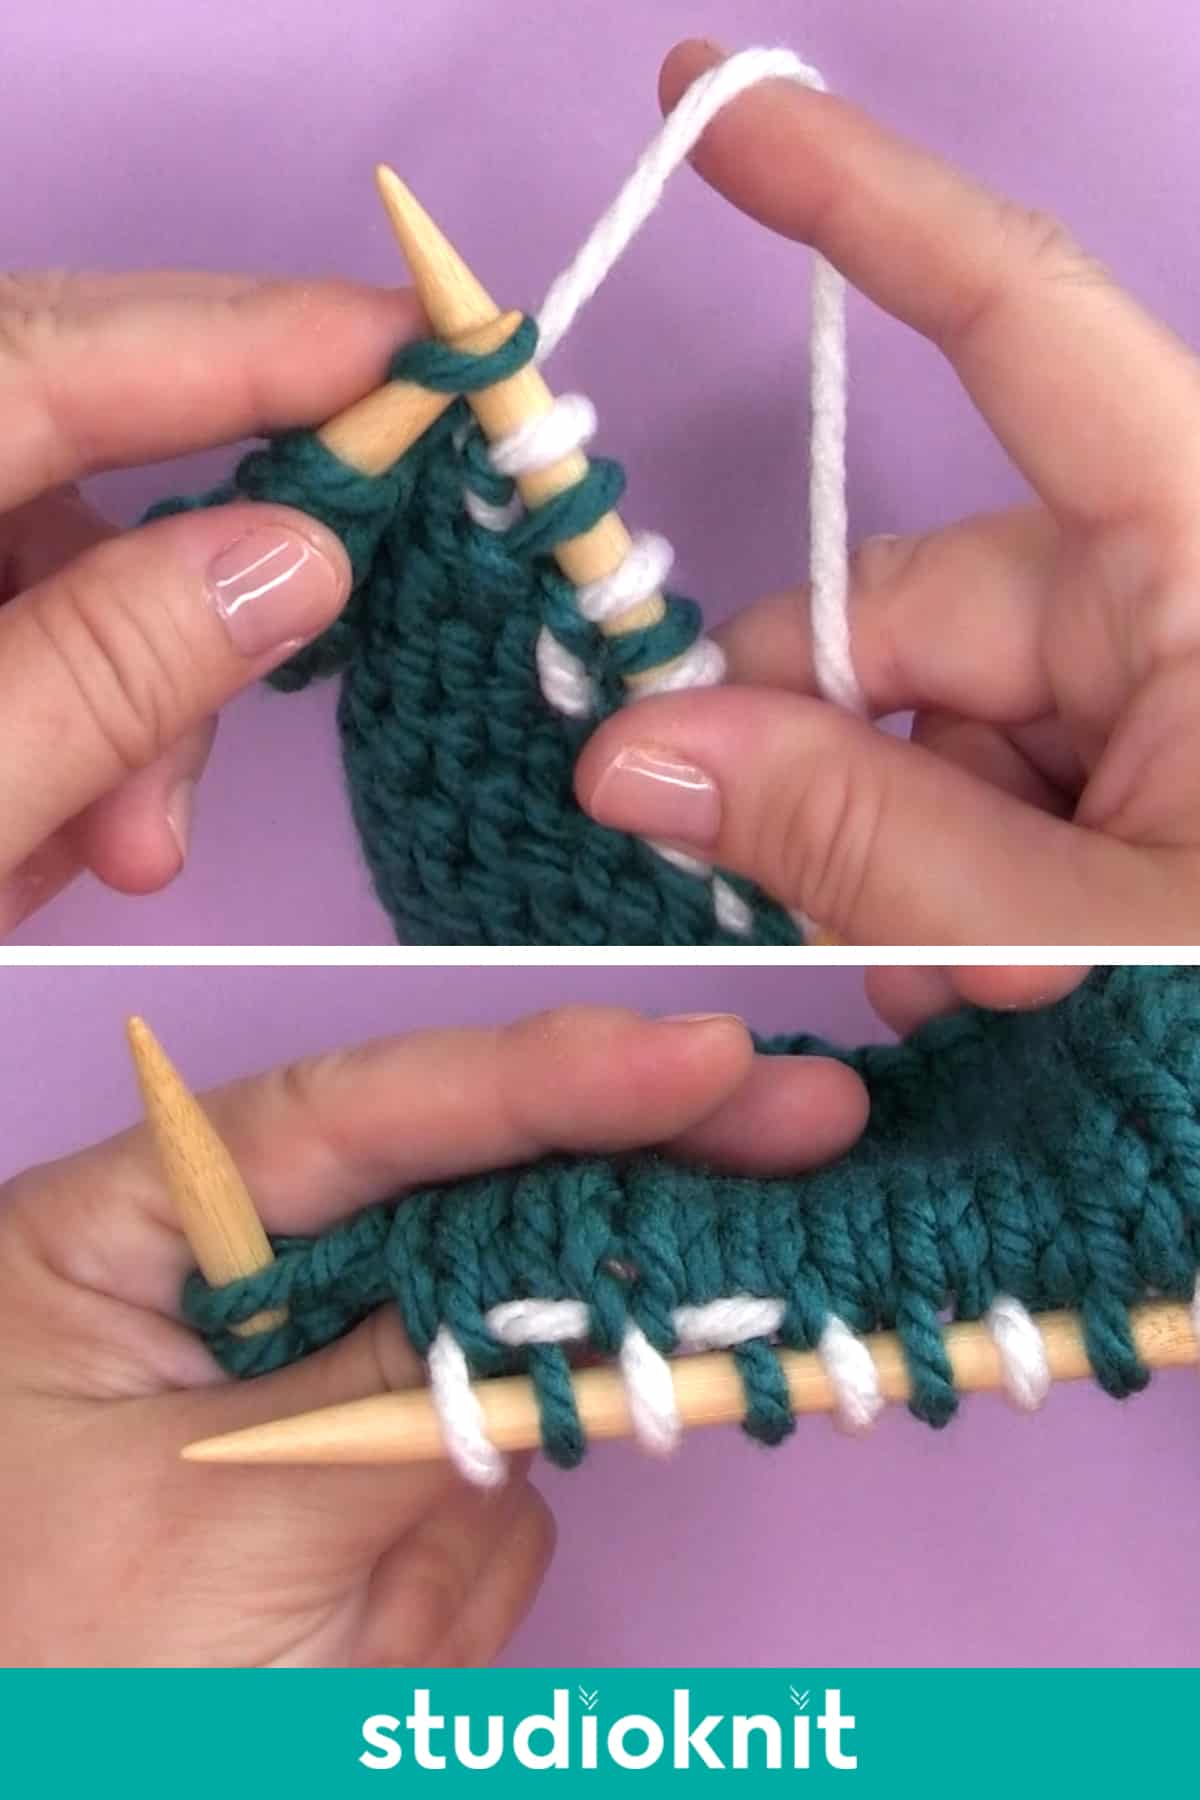 Demonstration of Slip a Stitch Knitwise on a Purl Row with Yarn in Back.